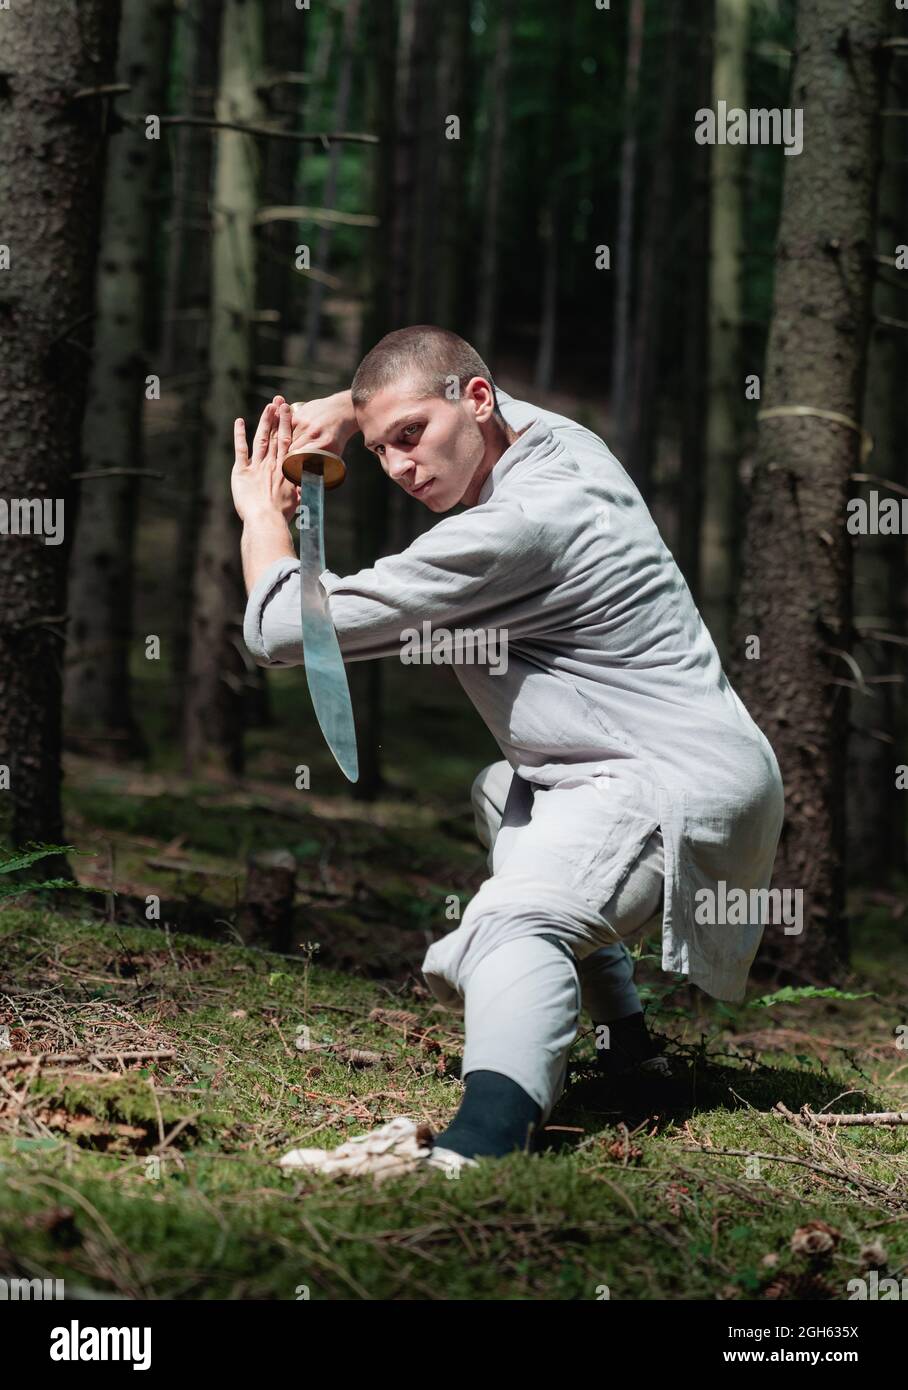 Full body man in traditional clothes practicing sword stance during kung fu training in forest Stock Photo